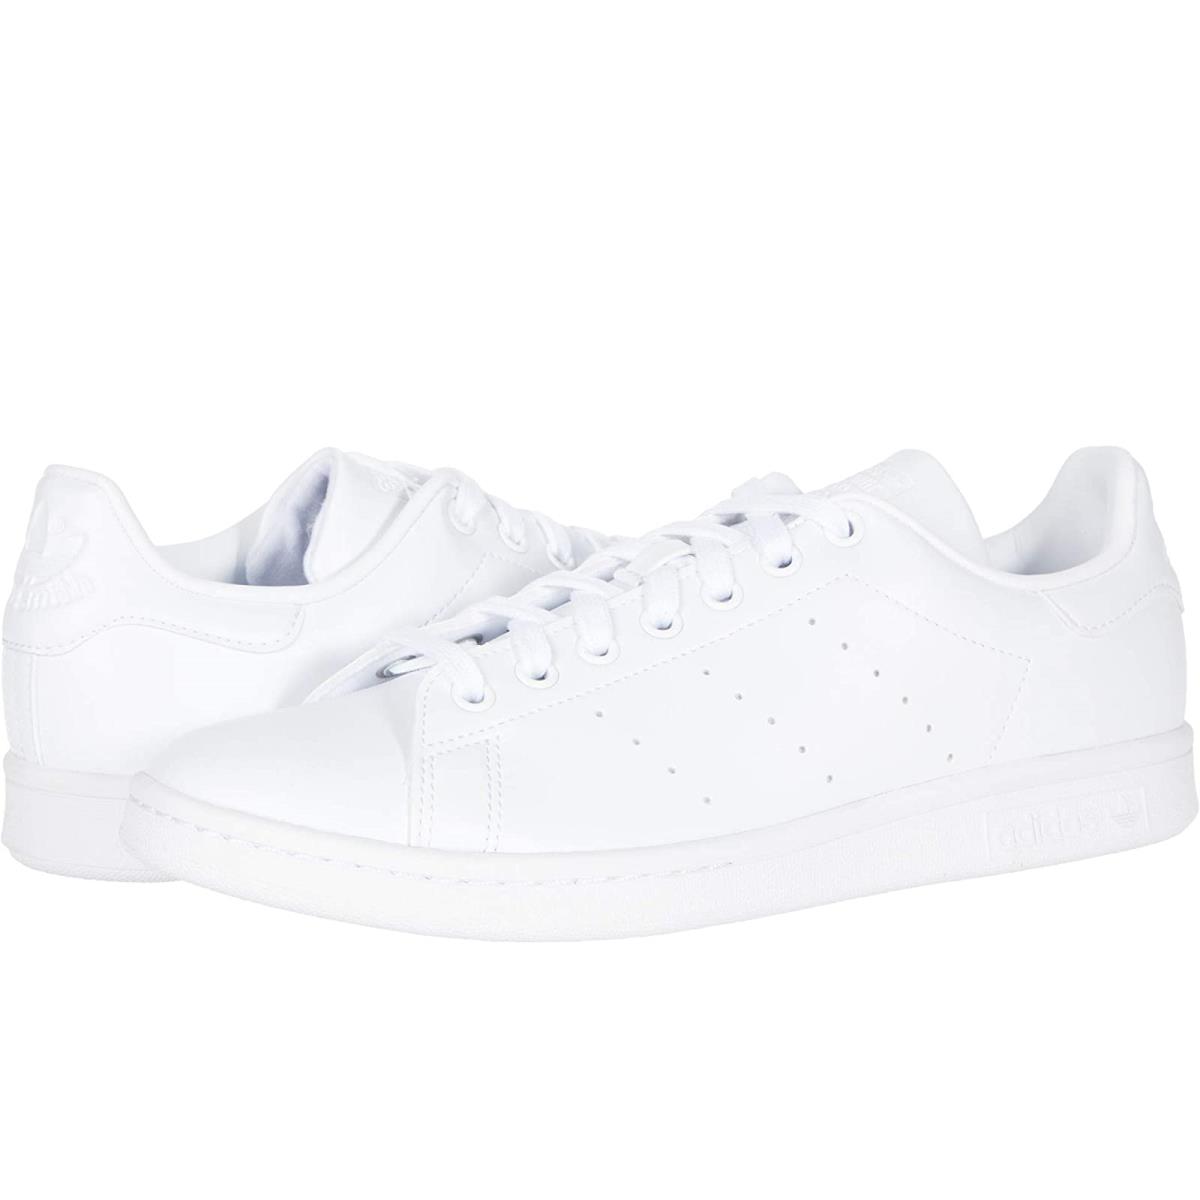 Man`s Sneakers Athletic Shoes Adidas Originals Stan Smith Footwear White/Footwear White/Core Black